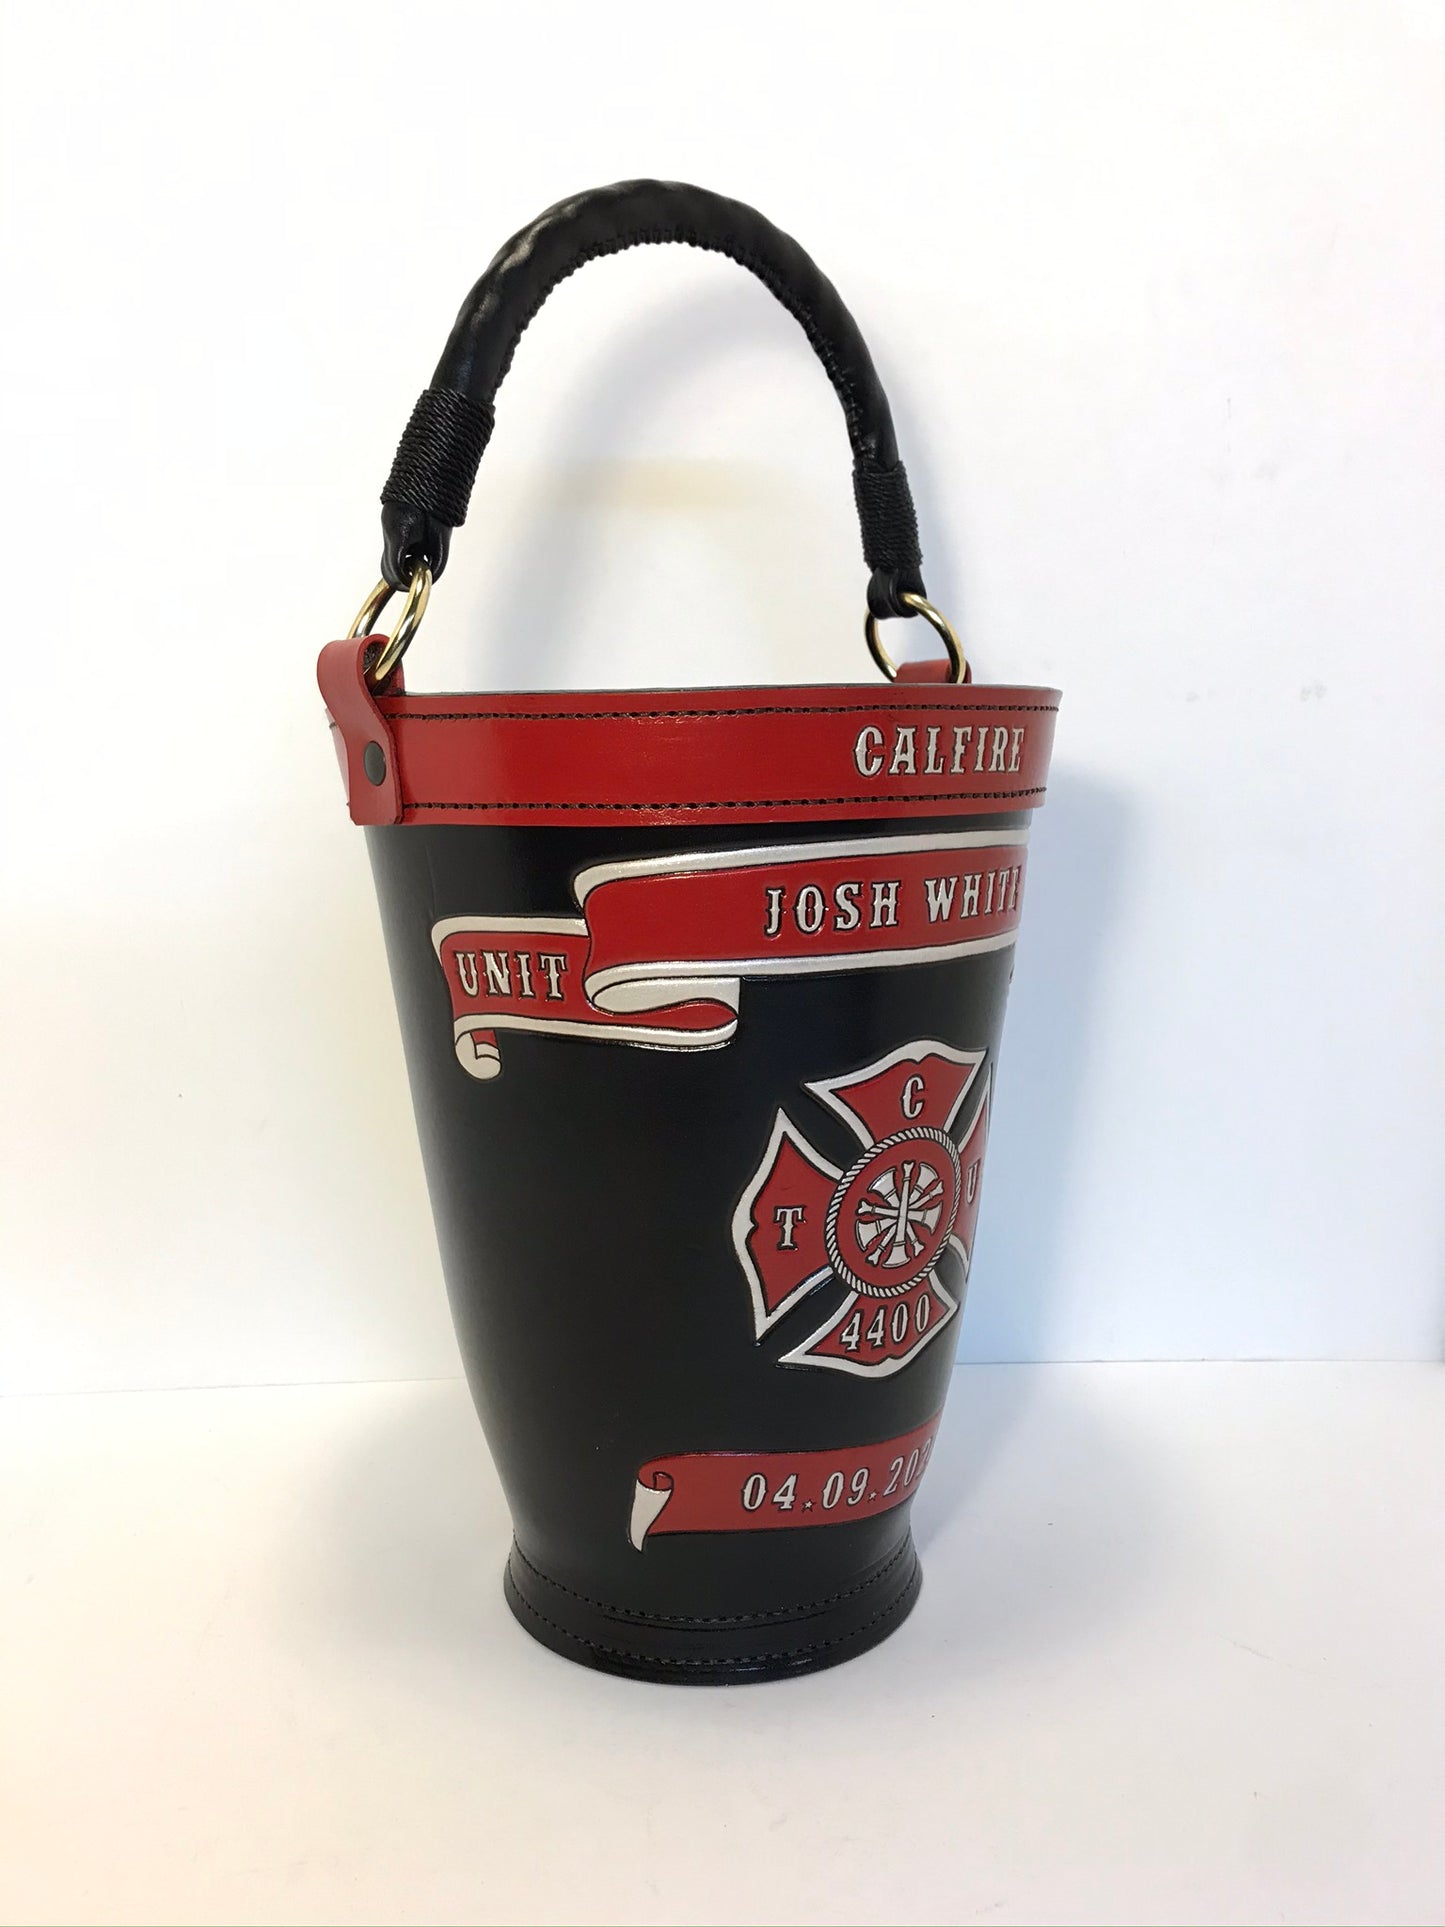 Legacy Leather Fire Buckets